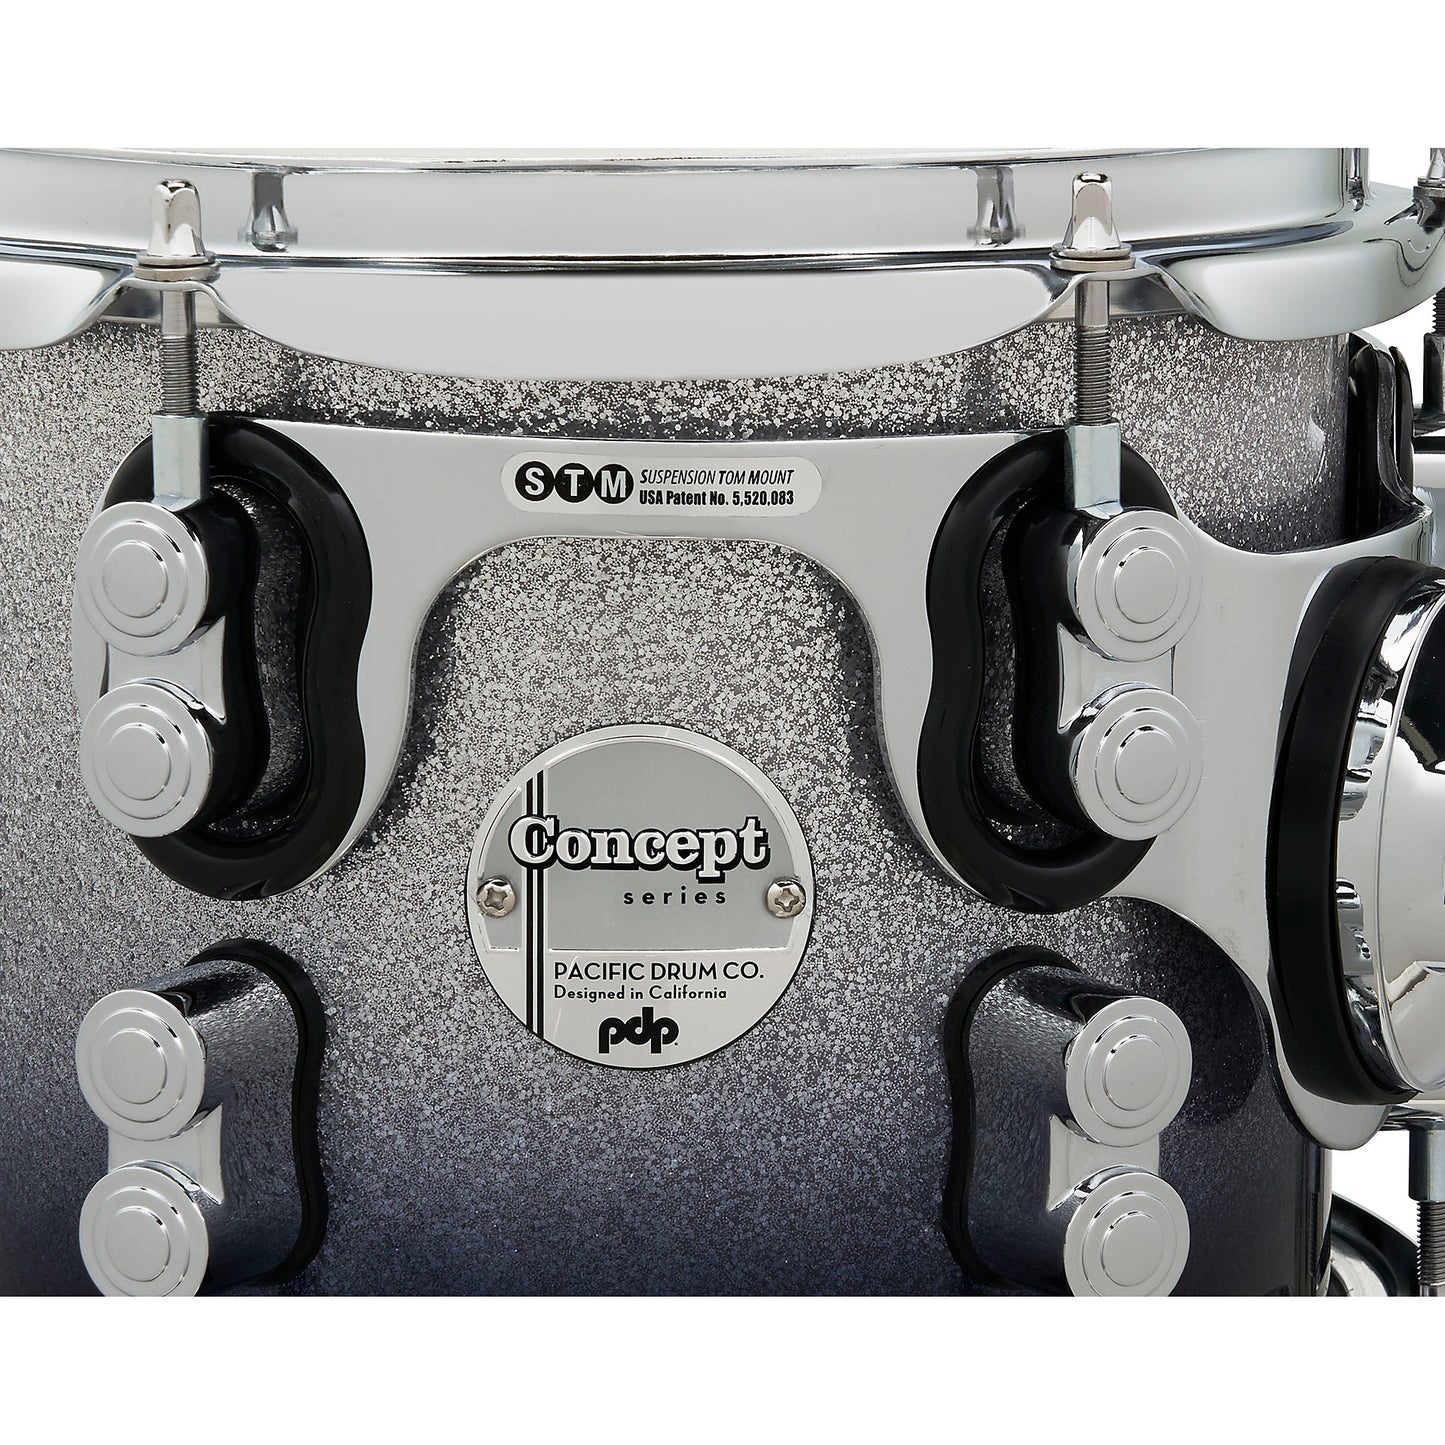 Pacific Drums Concept Maple 7pc Shell Kit Drumset Silver to Black Sparkle Fade